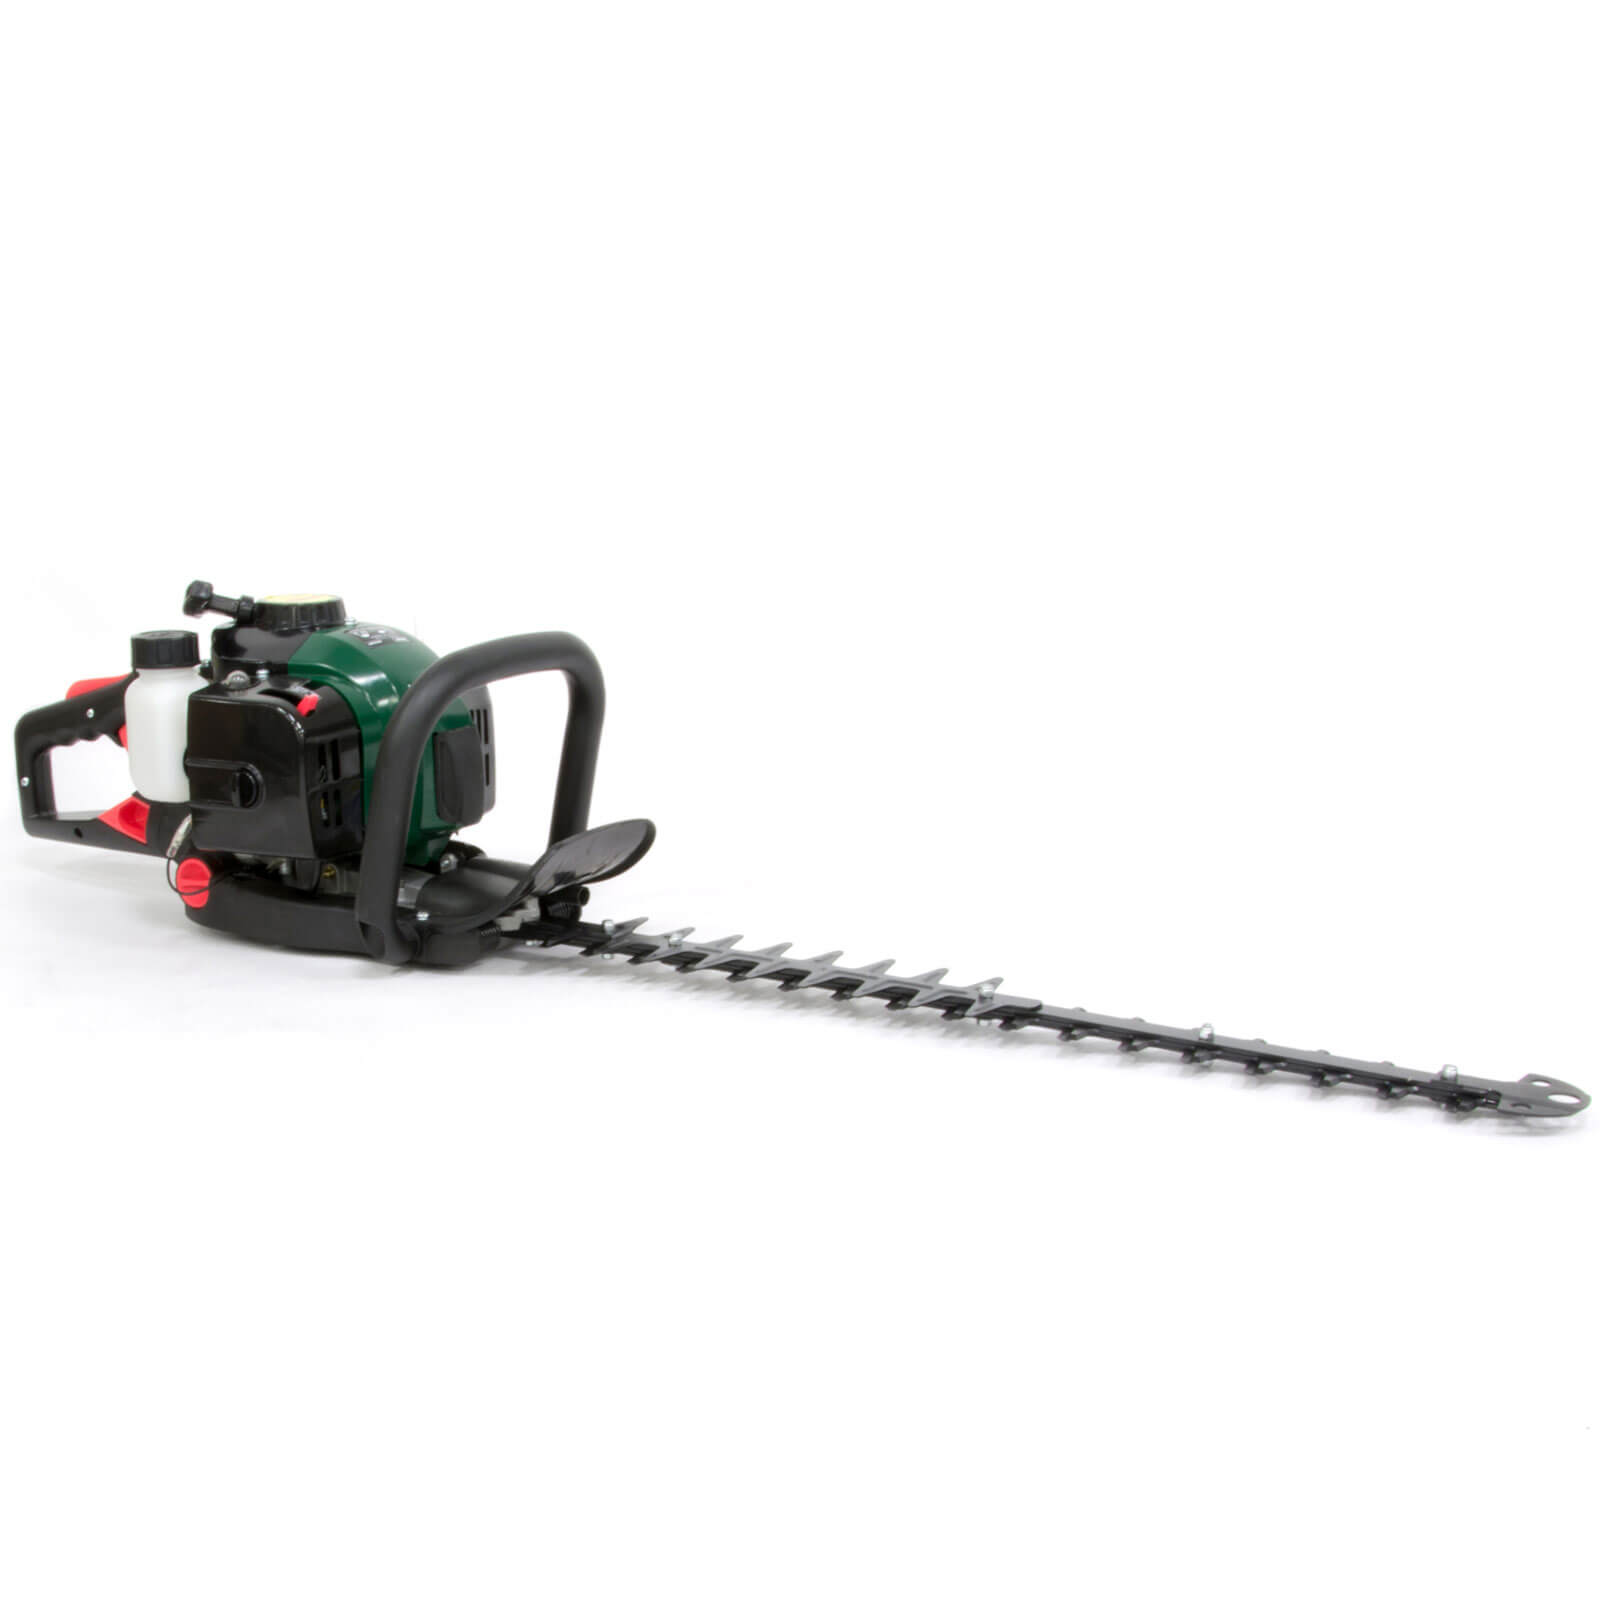 Photo of Webb Wehc600 Petrol Hedge Trimmer 560mm Free Lubricant- Safety Glasses & Gloves Worth £10.99